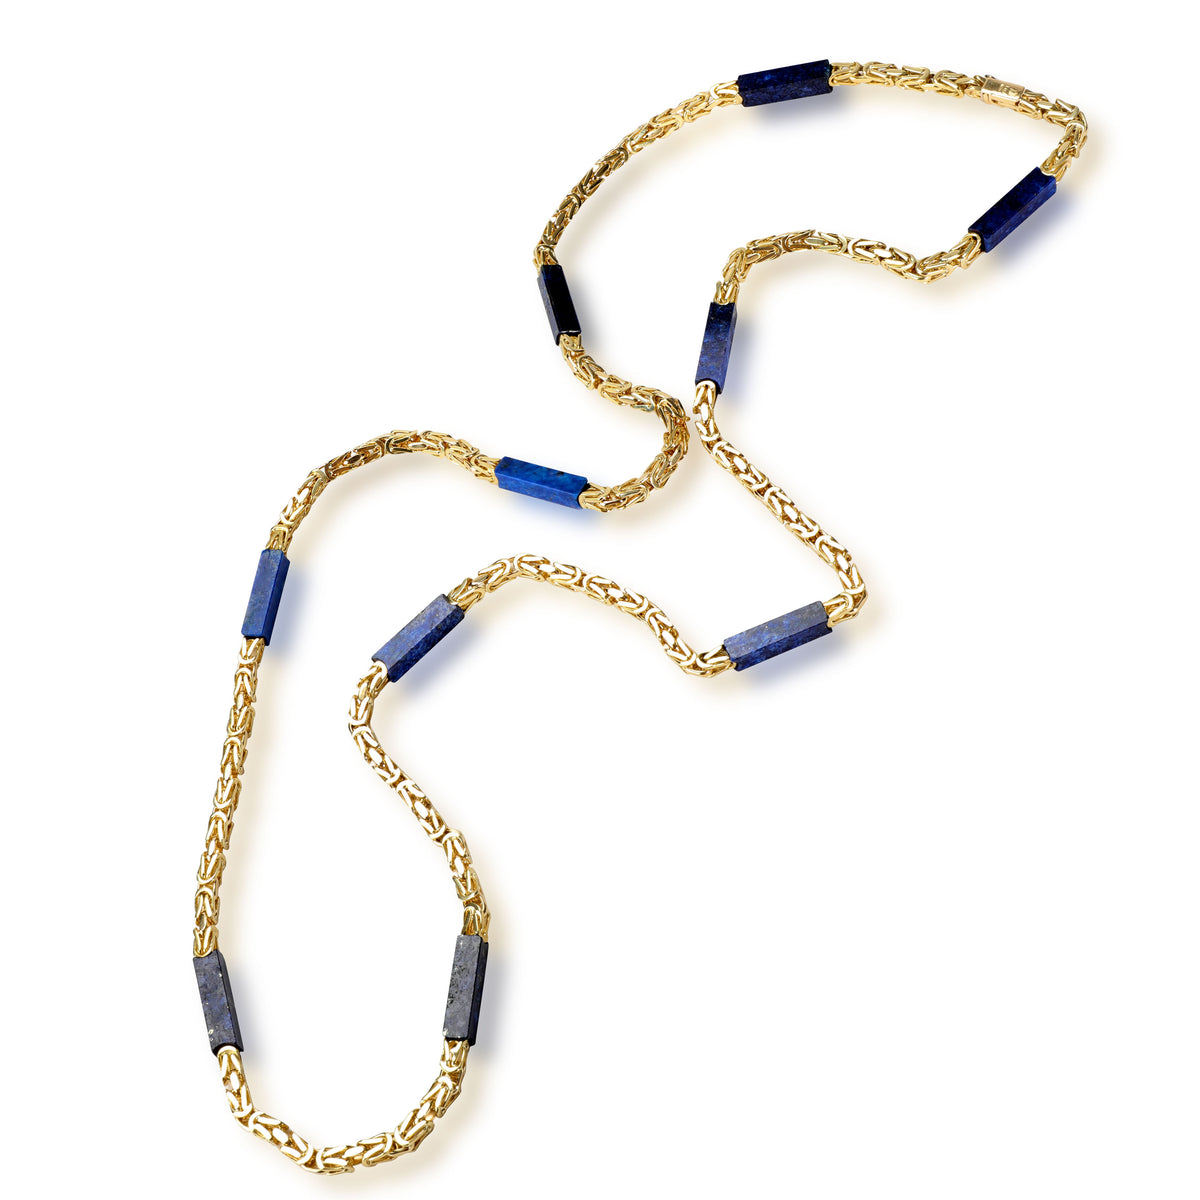 Vintage Lapiis Lazuli 10 Station Necklace in 18K Yelllow Gold